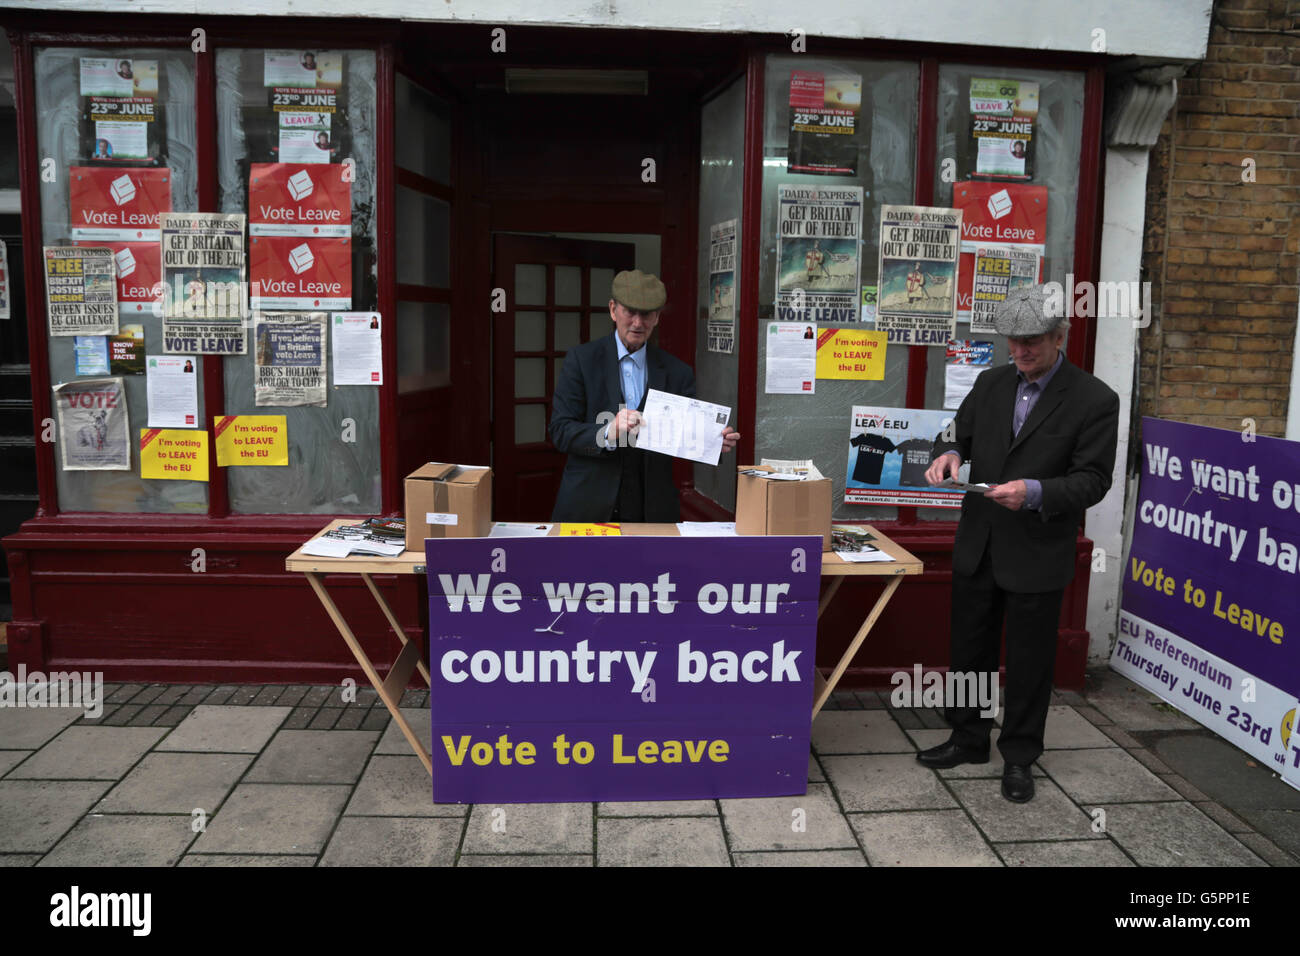 London, UK. 23rd June, 2016. Campaigners encouraging people to vote to Leave  the European Union. Credit:  Thabo Jaiyesimi/Alamy Live News Stock Photo